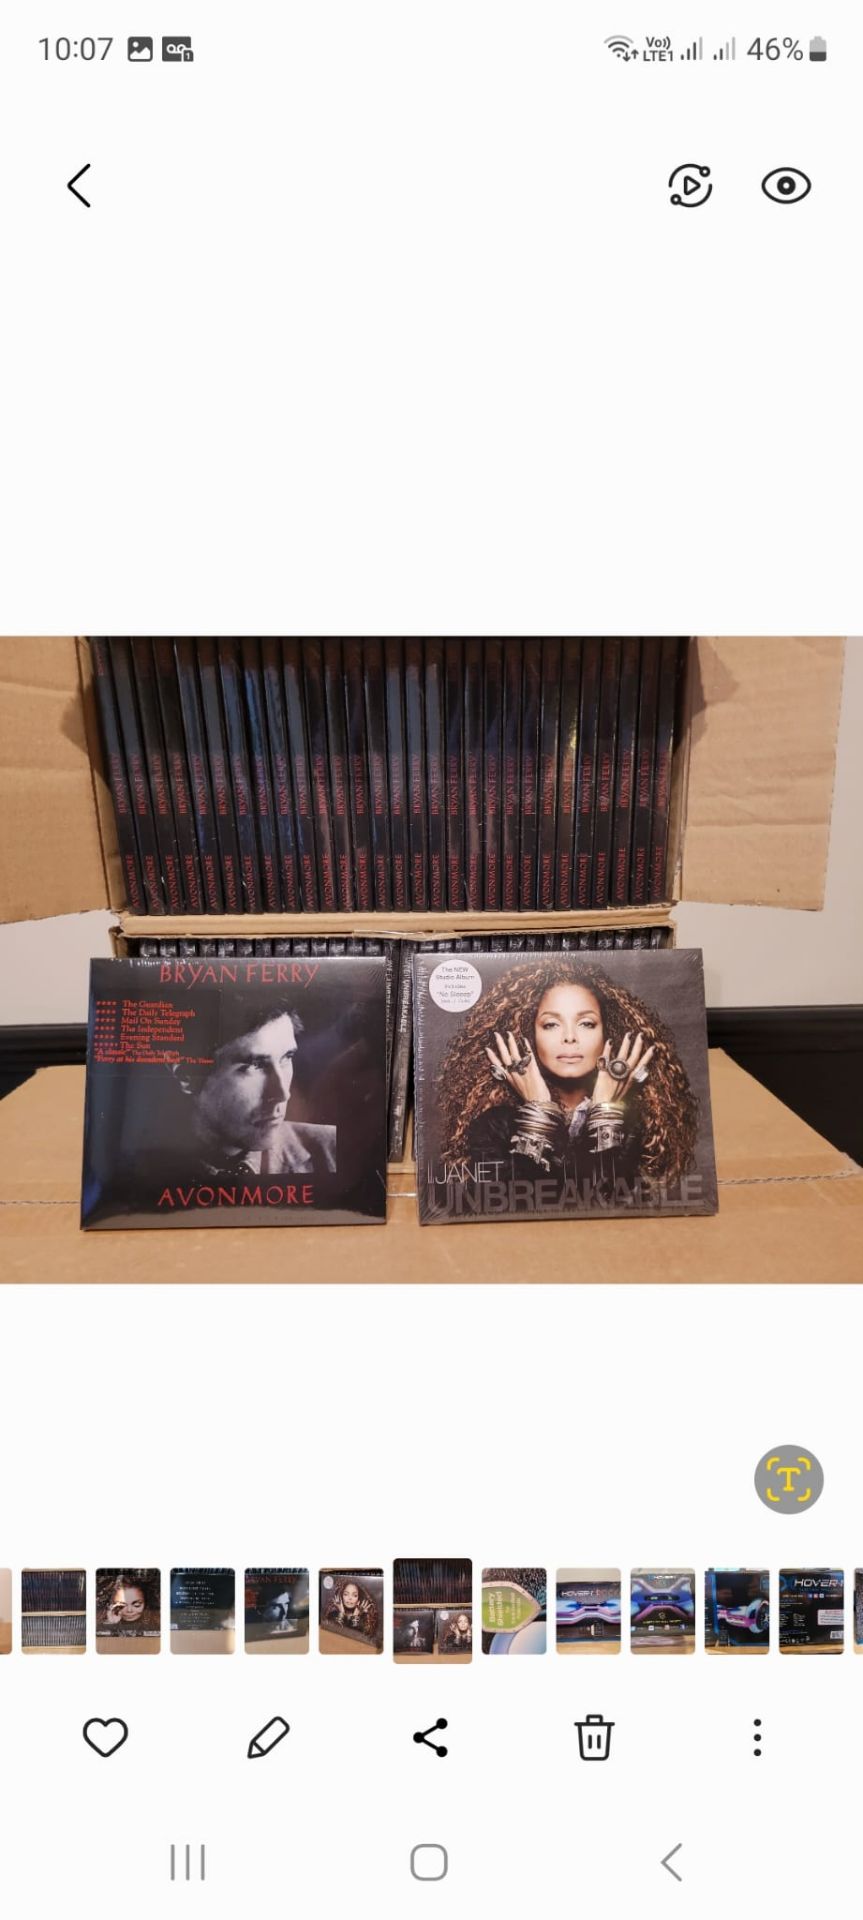 CD Janet Jackson and Brain Ferry x 6000